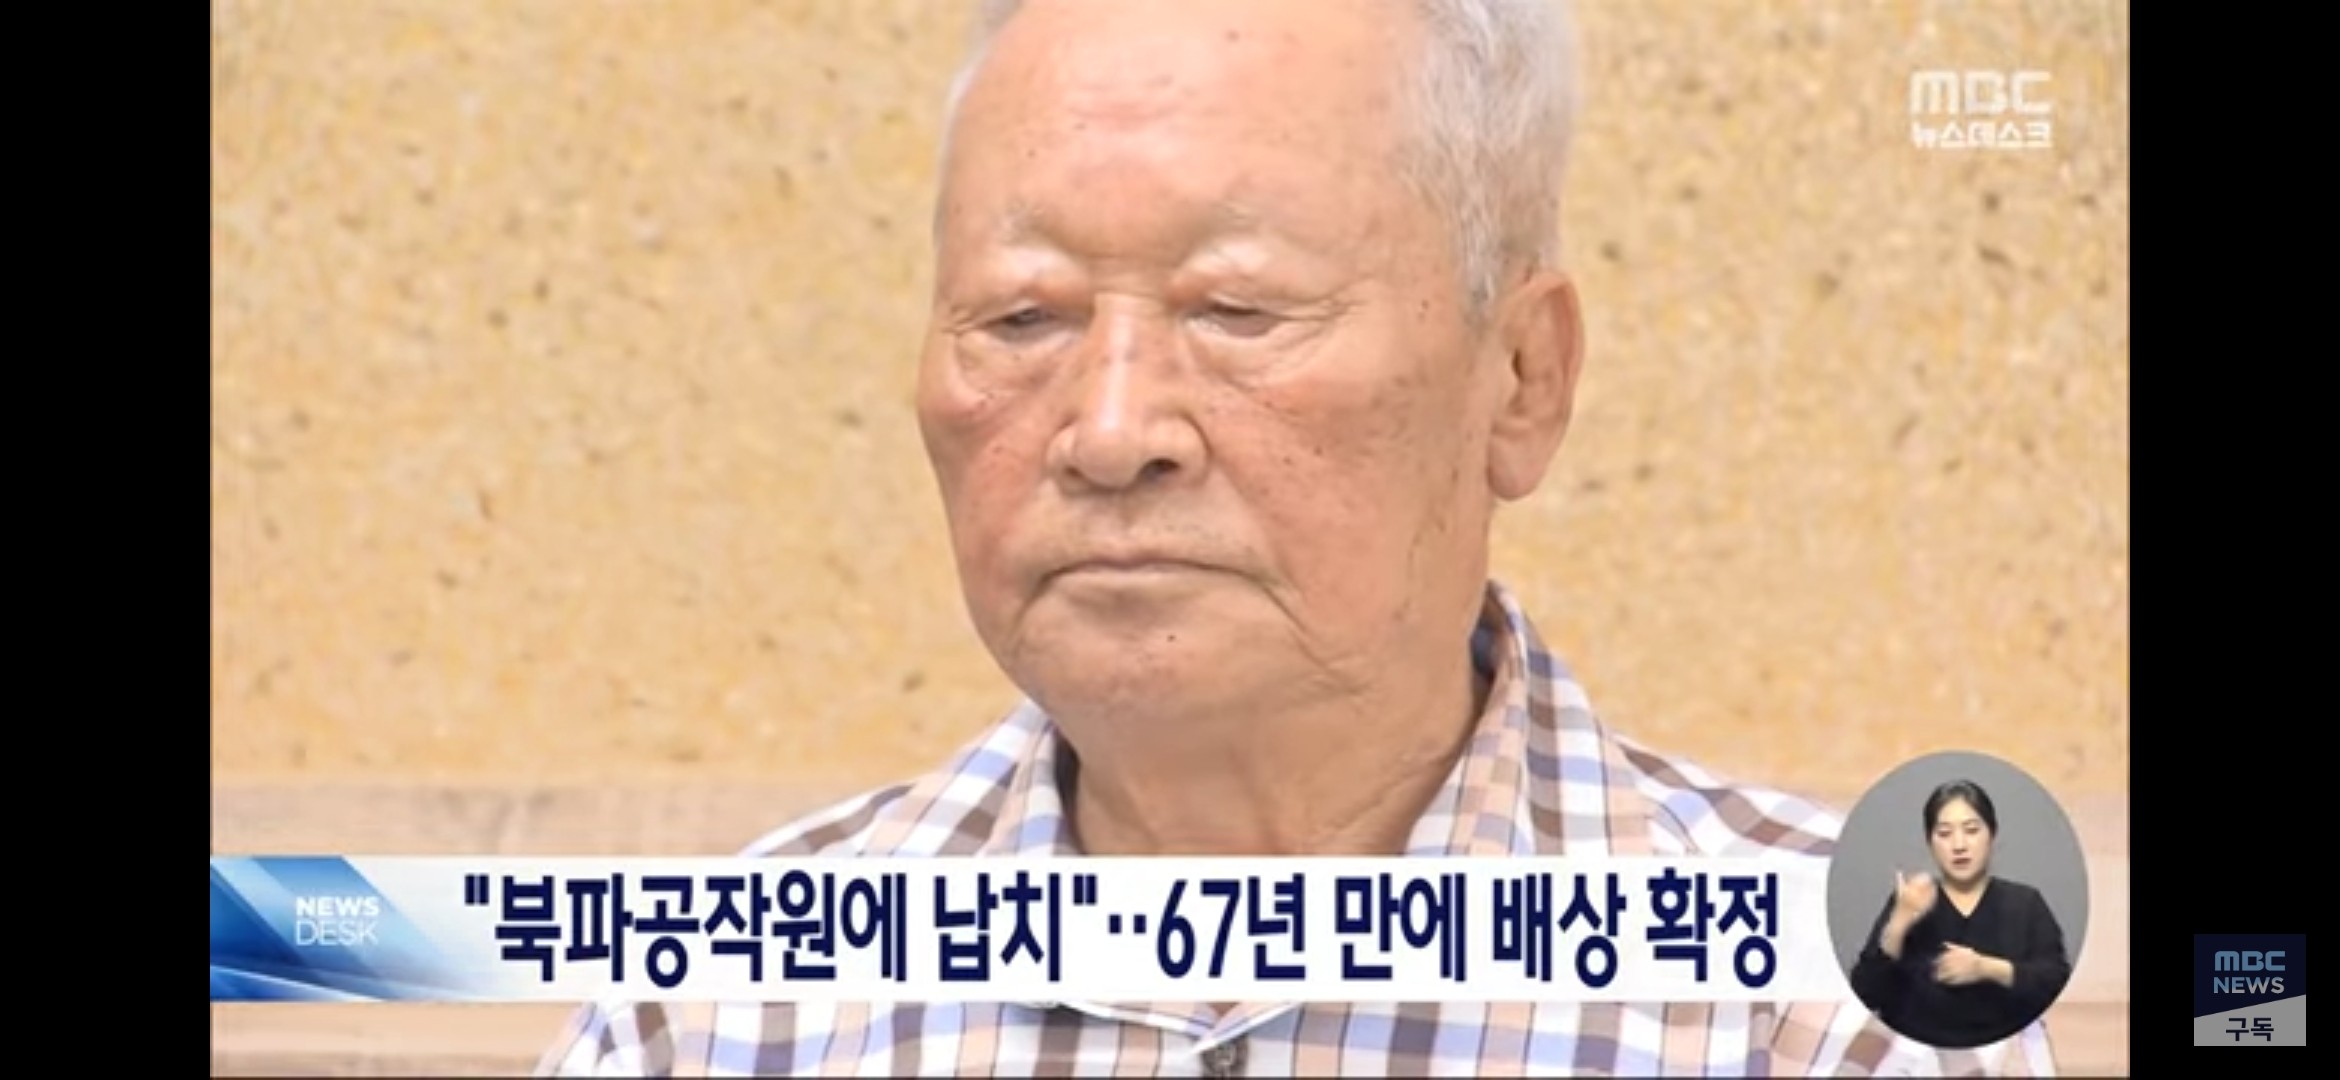 Kim Joo-sam, now 86, was abducted from his North Korean village by South Korean spies in 1956. Photo: Handout